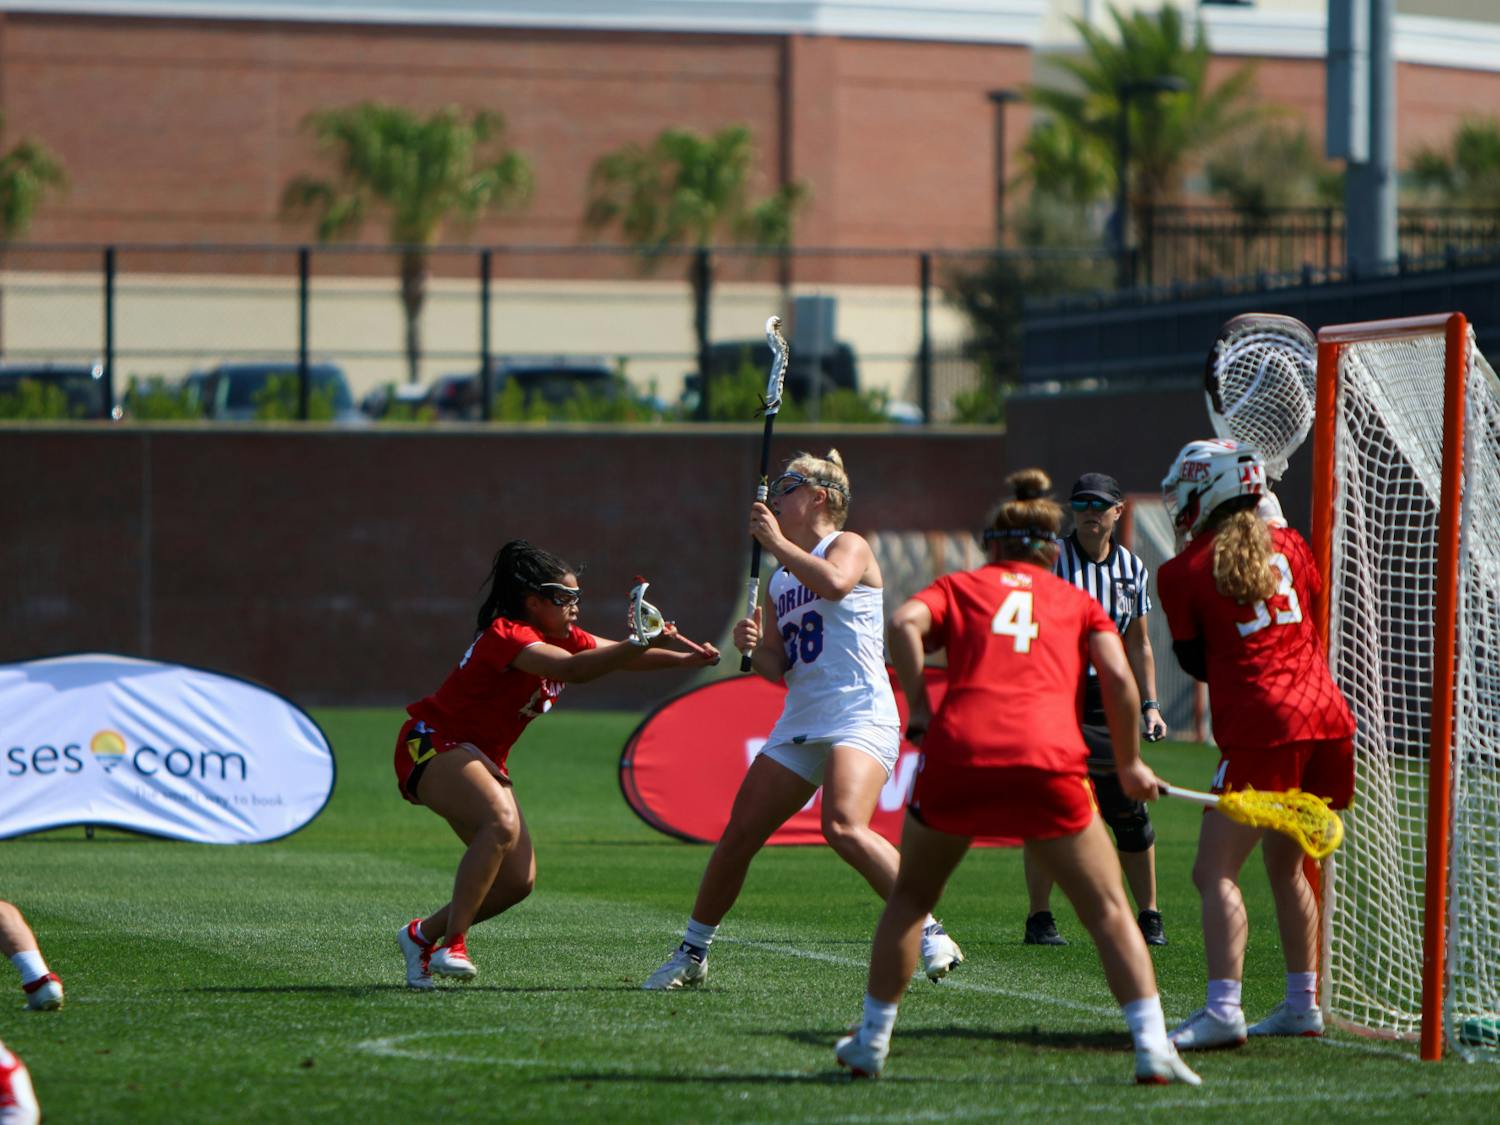 Florida attacker Tayler Warehime stands near Maryland's goal during the Gators' 14-13 loss to the Terrapins Saturday, Feb. 25, 2023.